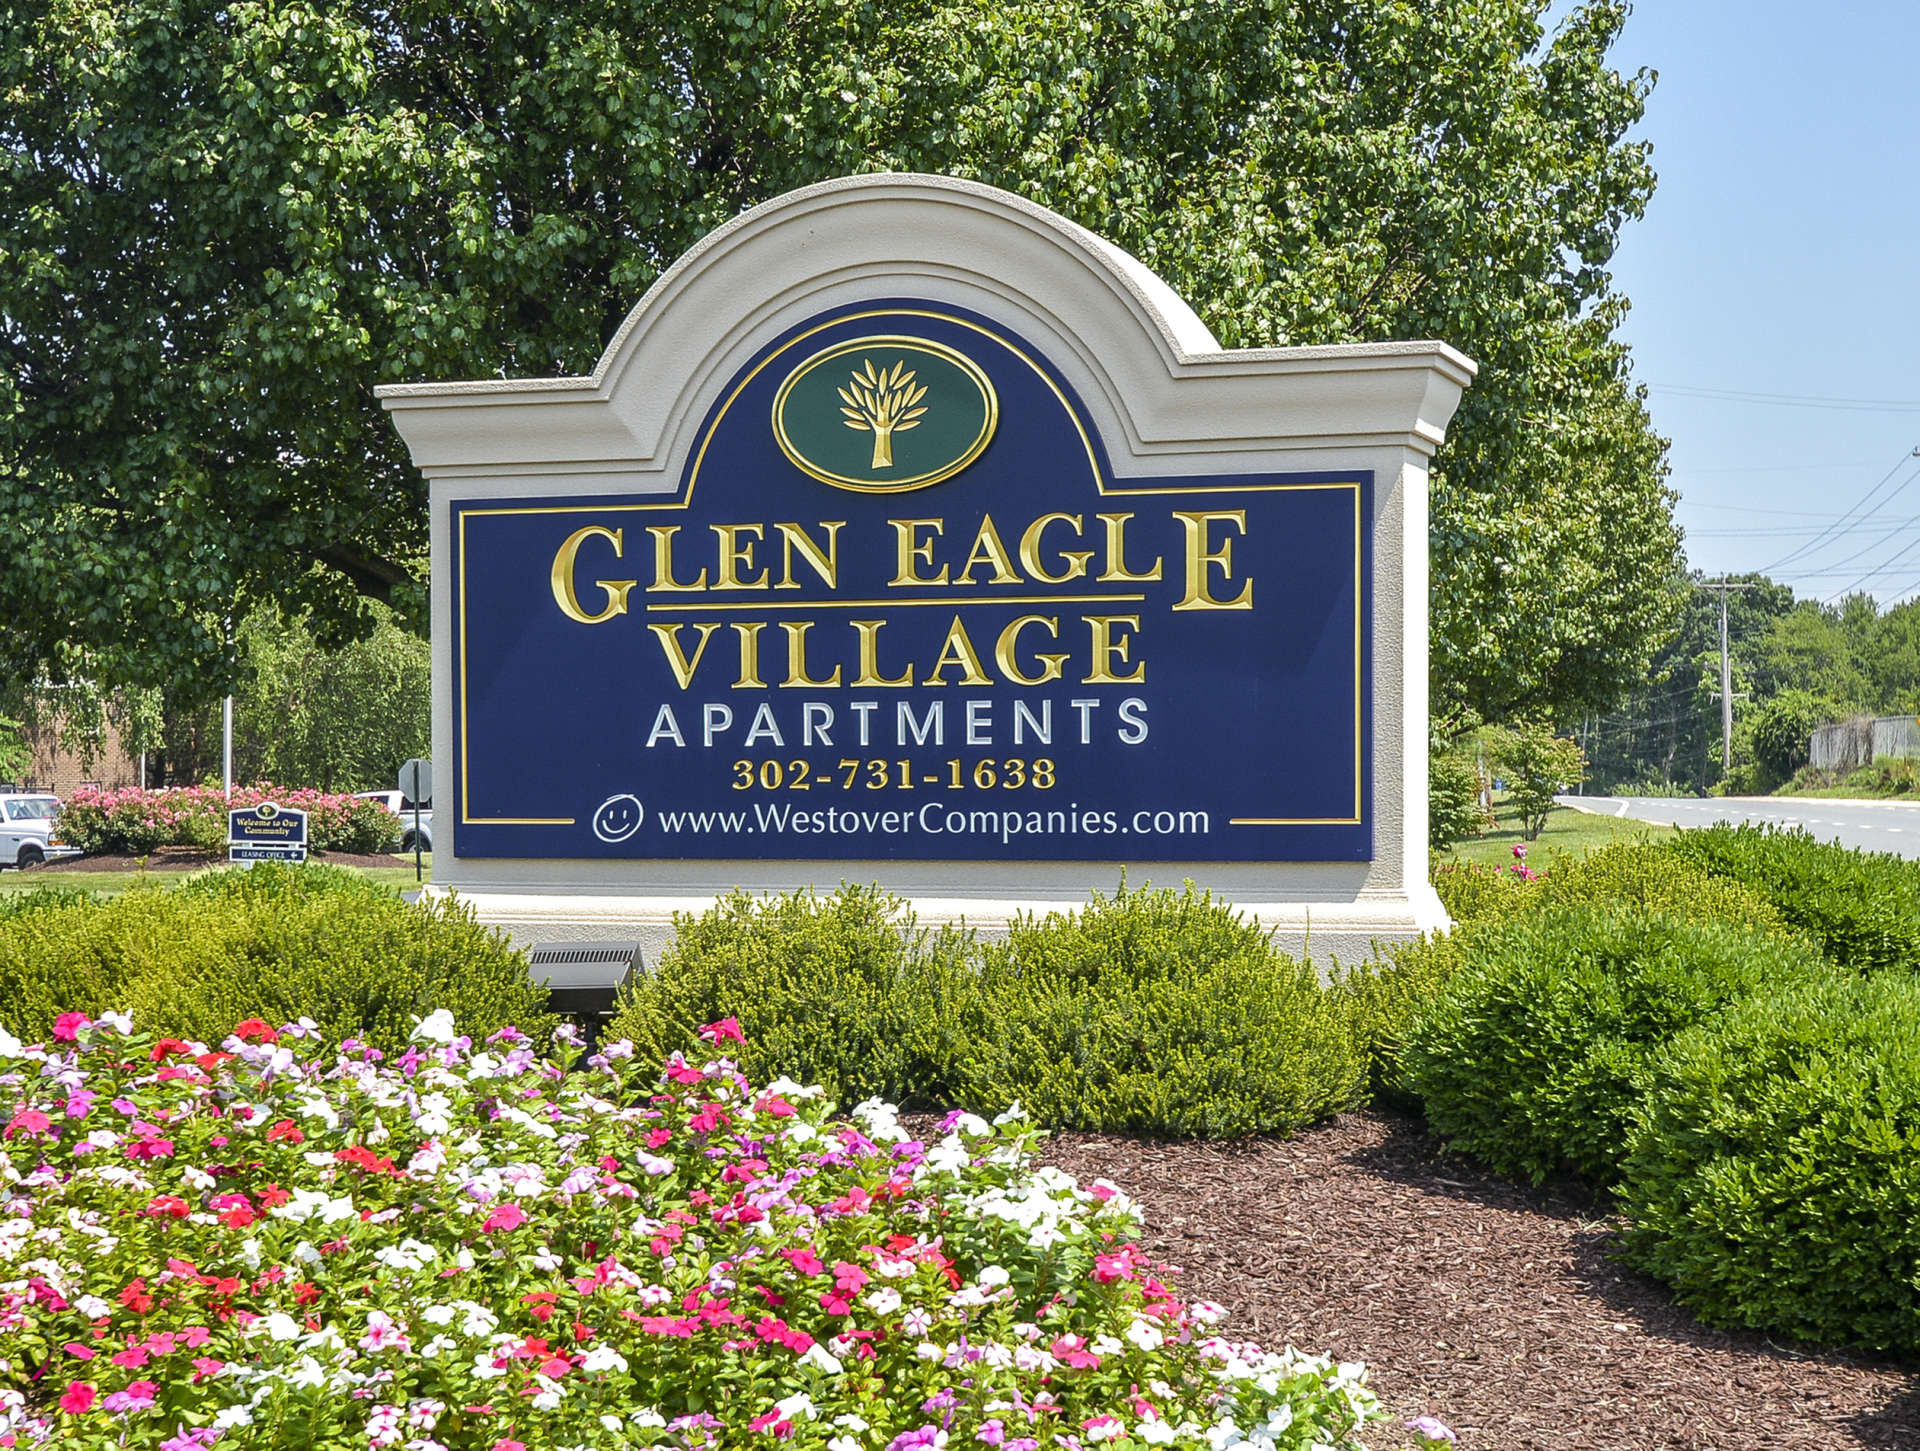 Glen Eagle Village apartments sign in Newark, DE with shrubs around the sign.